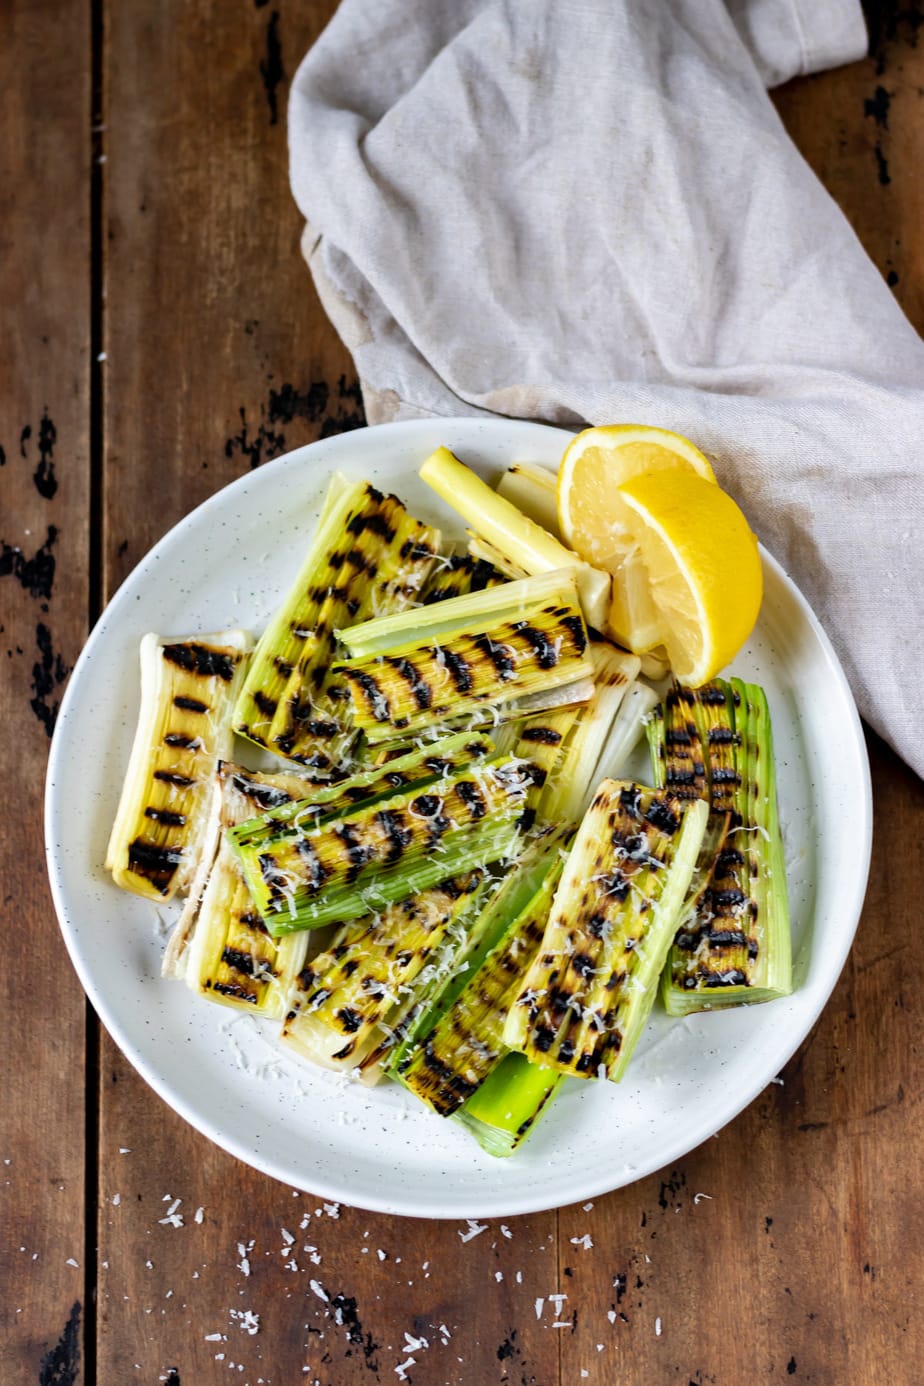 Plate of grilled leeks with a wedge of lemon.